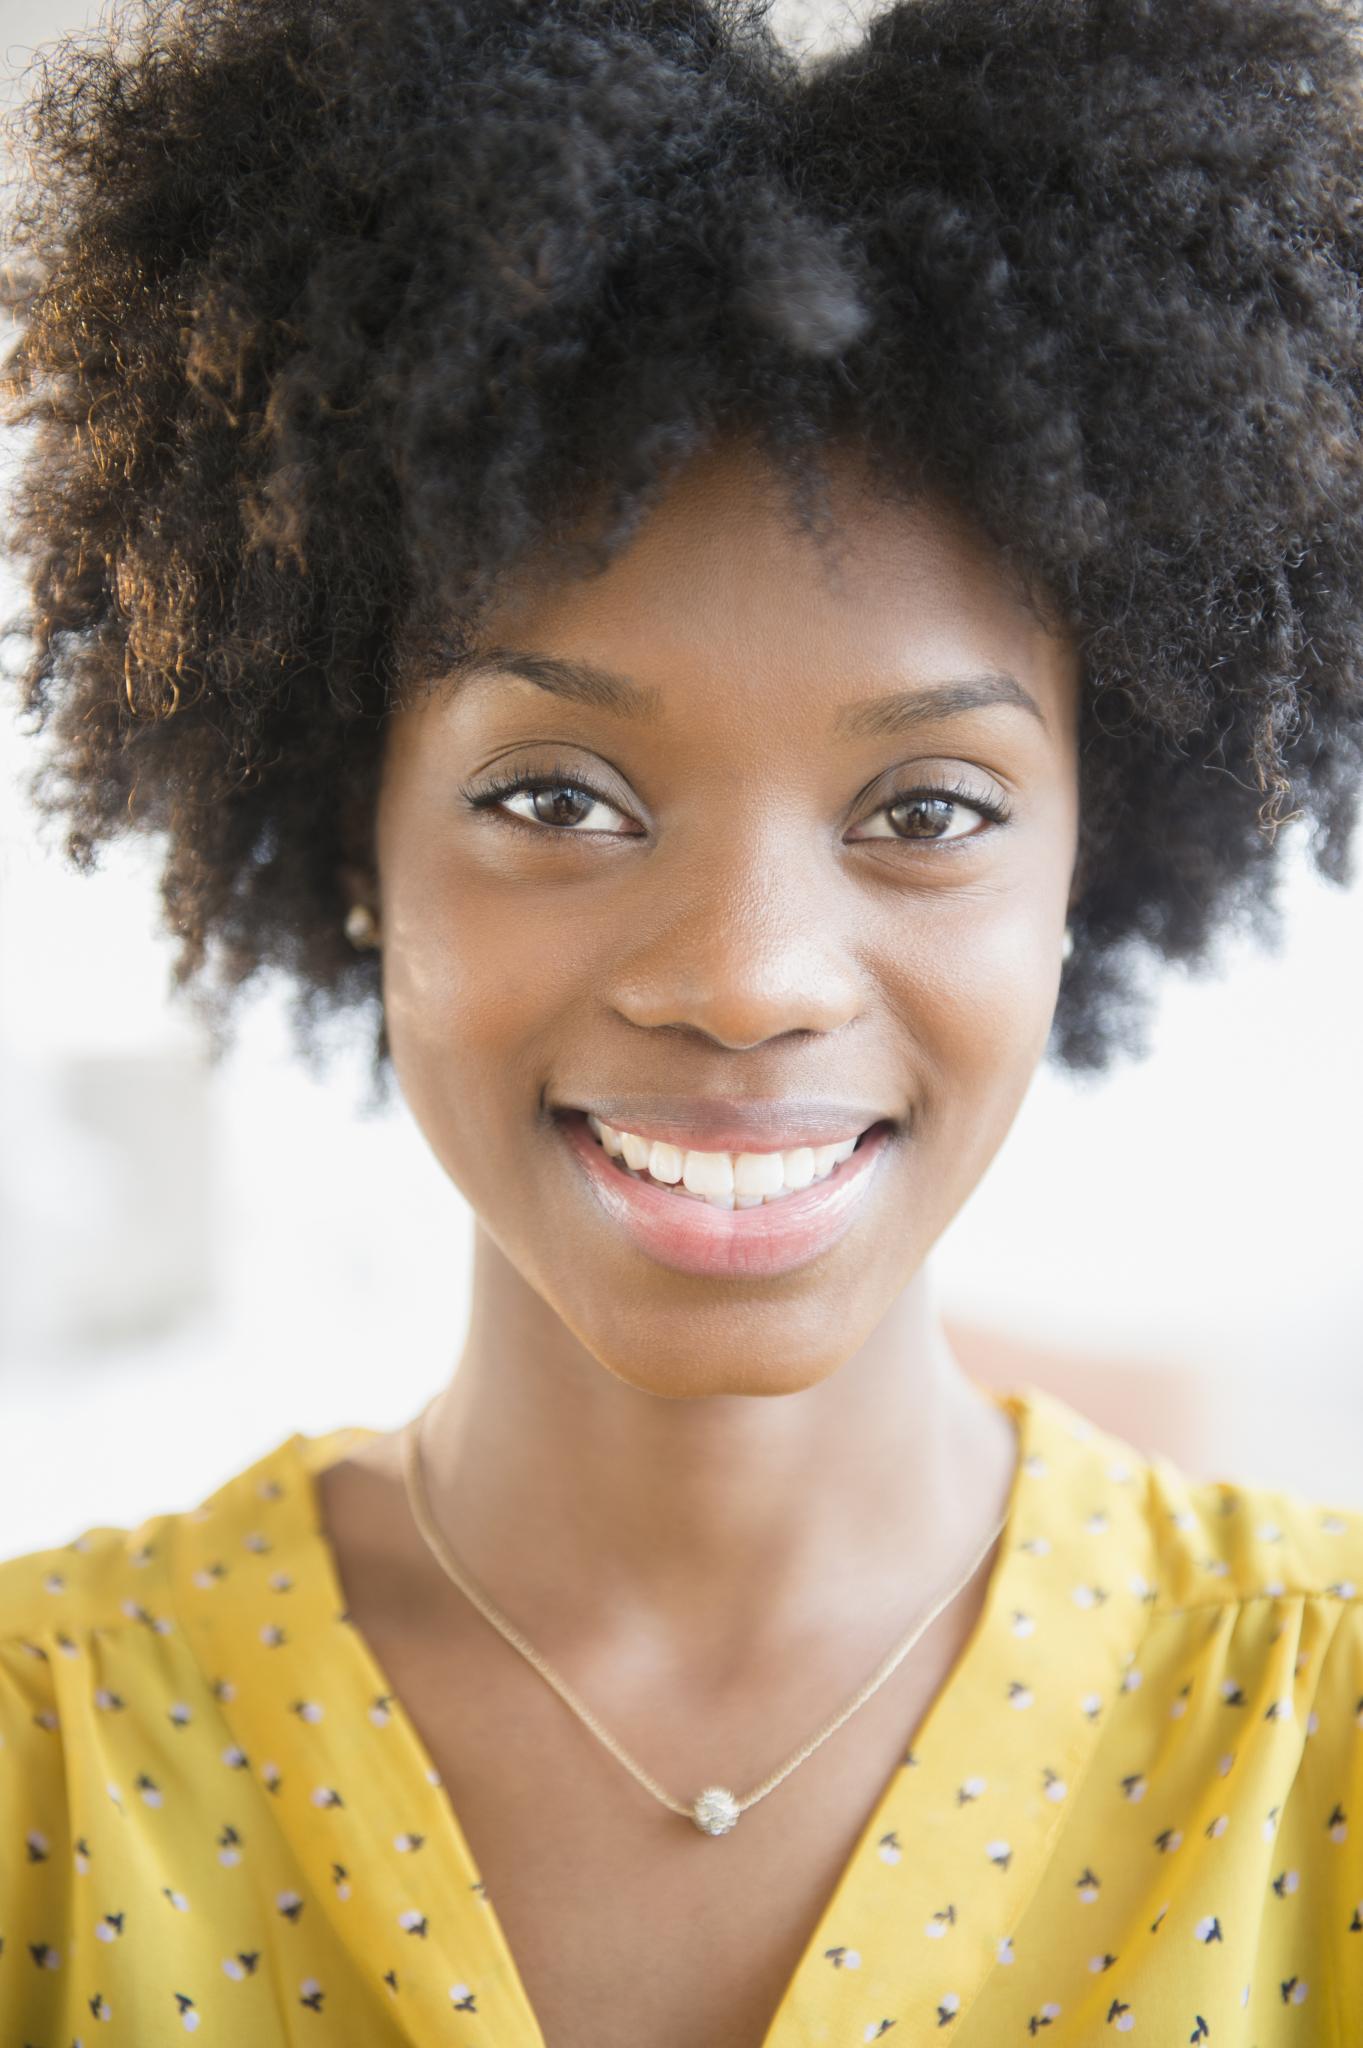 5 Ways to Celebrate Natural Hair This Holiday
